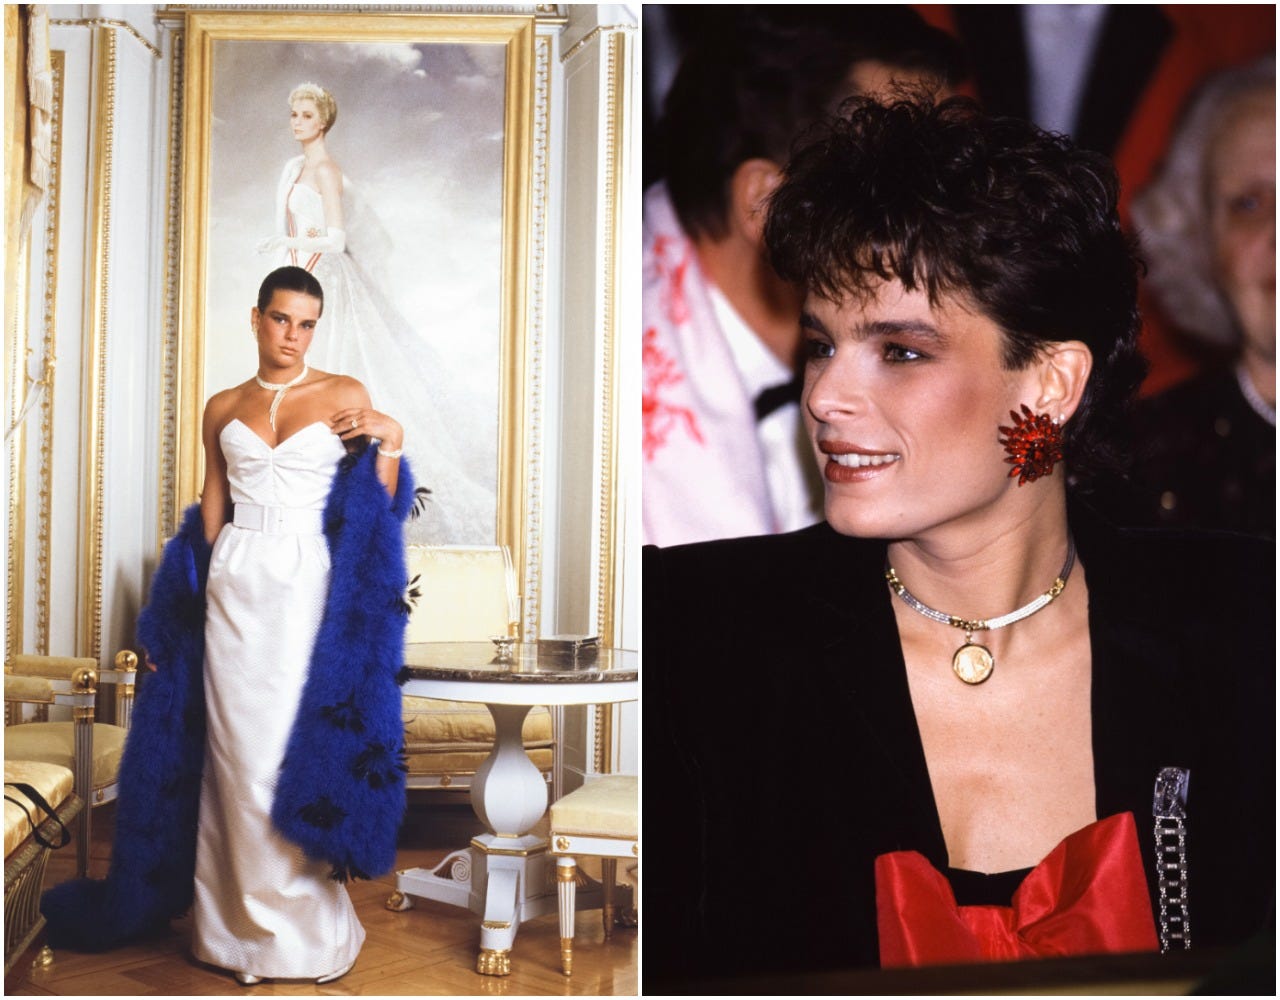 Princess Stéphanie left pictured in a white gown posing in front of a portrait of her mother Grace Kelly and right in the audience of a circus festival in Monaco.